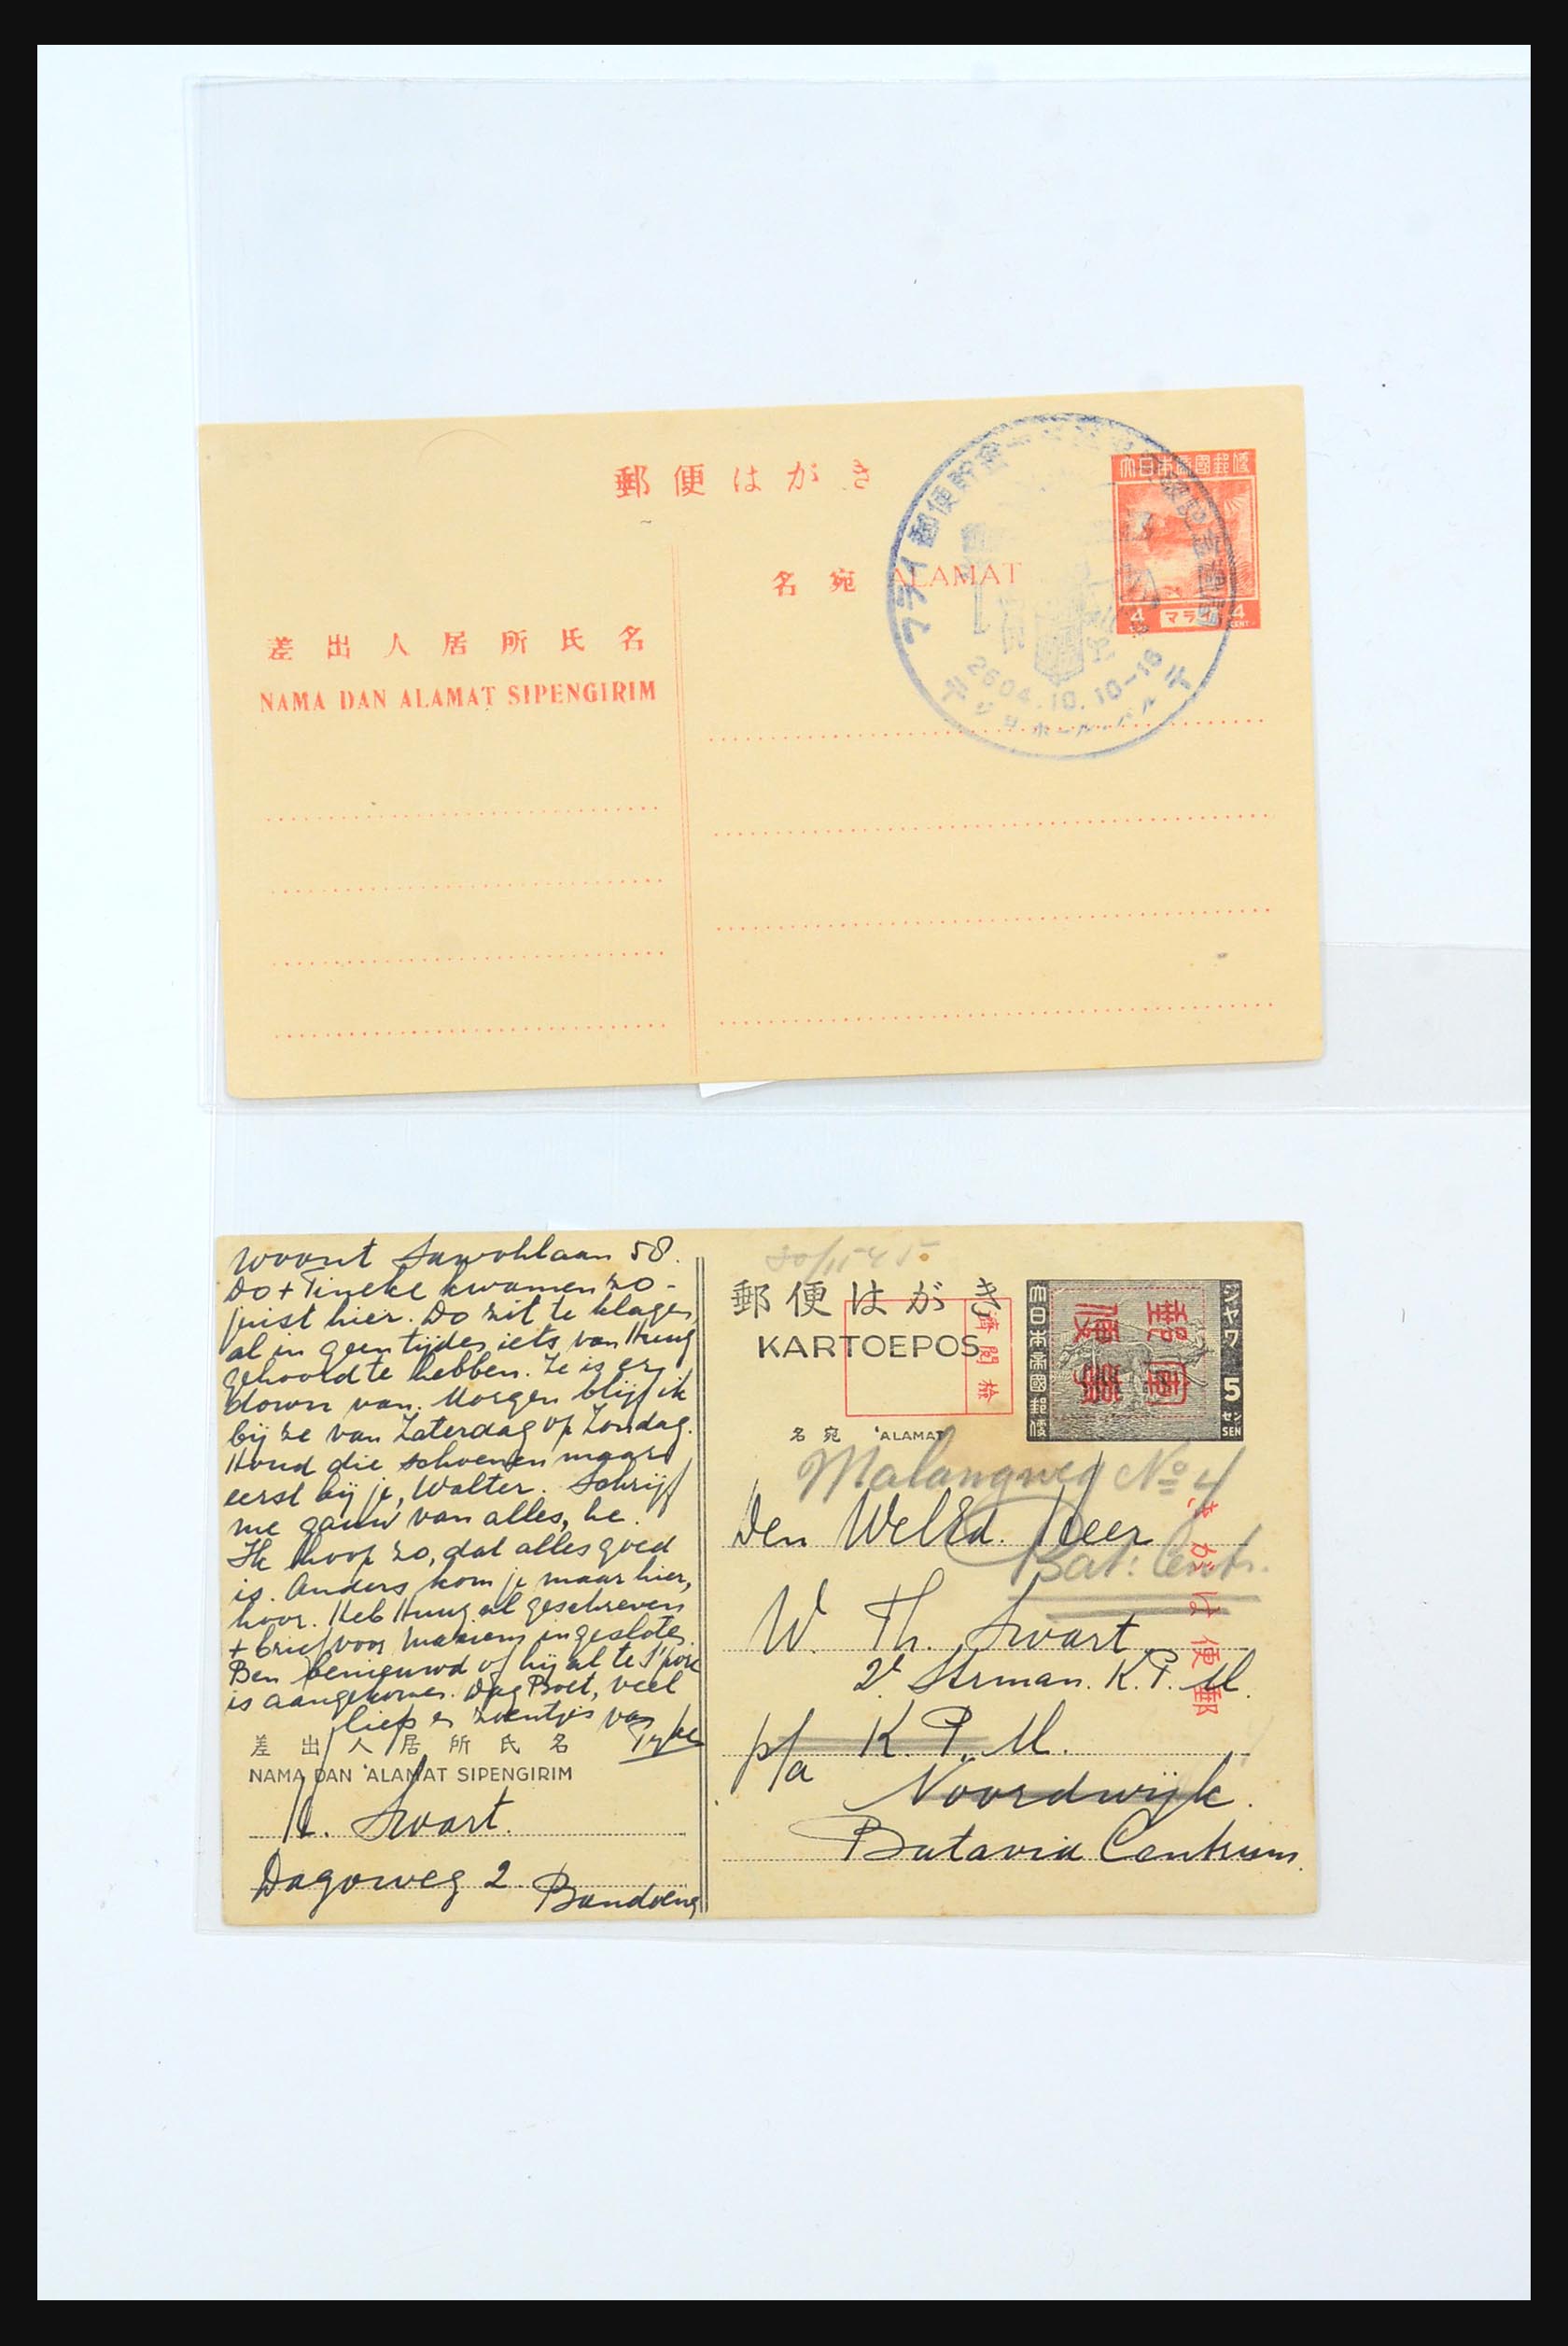 31362 029 - 31362 Netherlands Indies Japanese occupation covers 1942-1945.